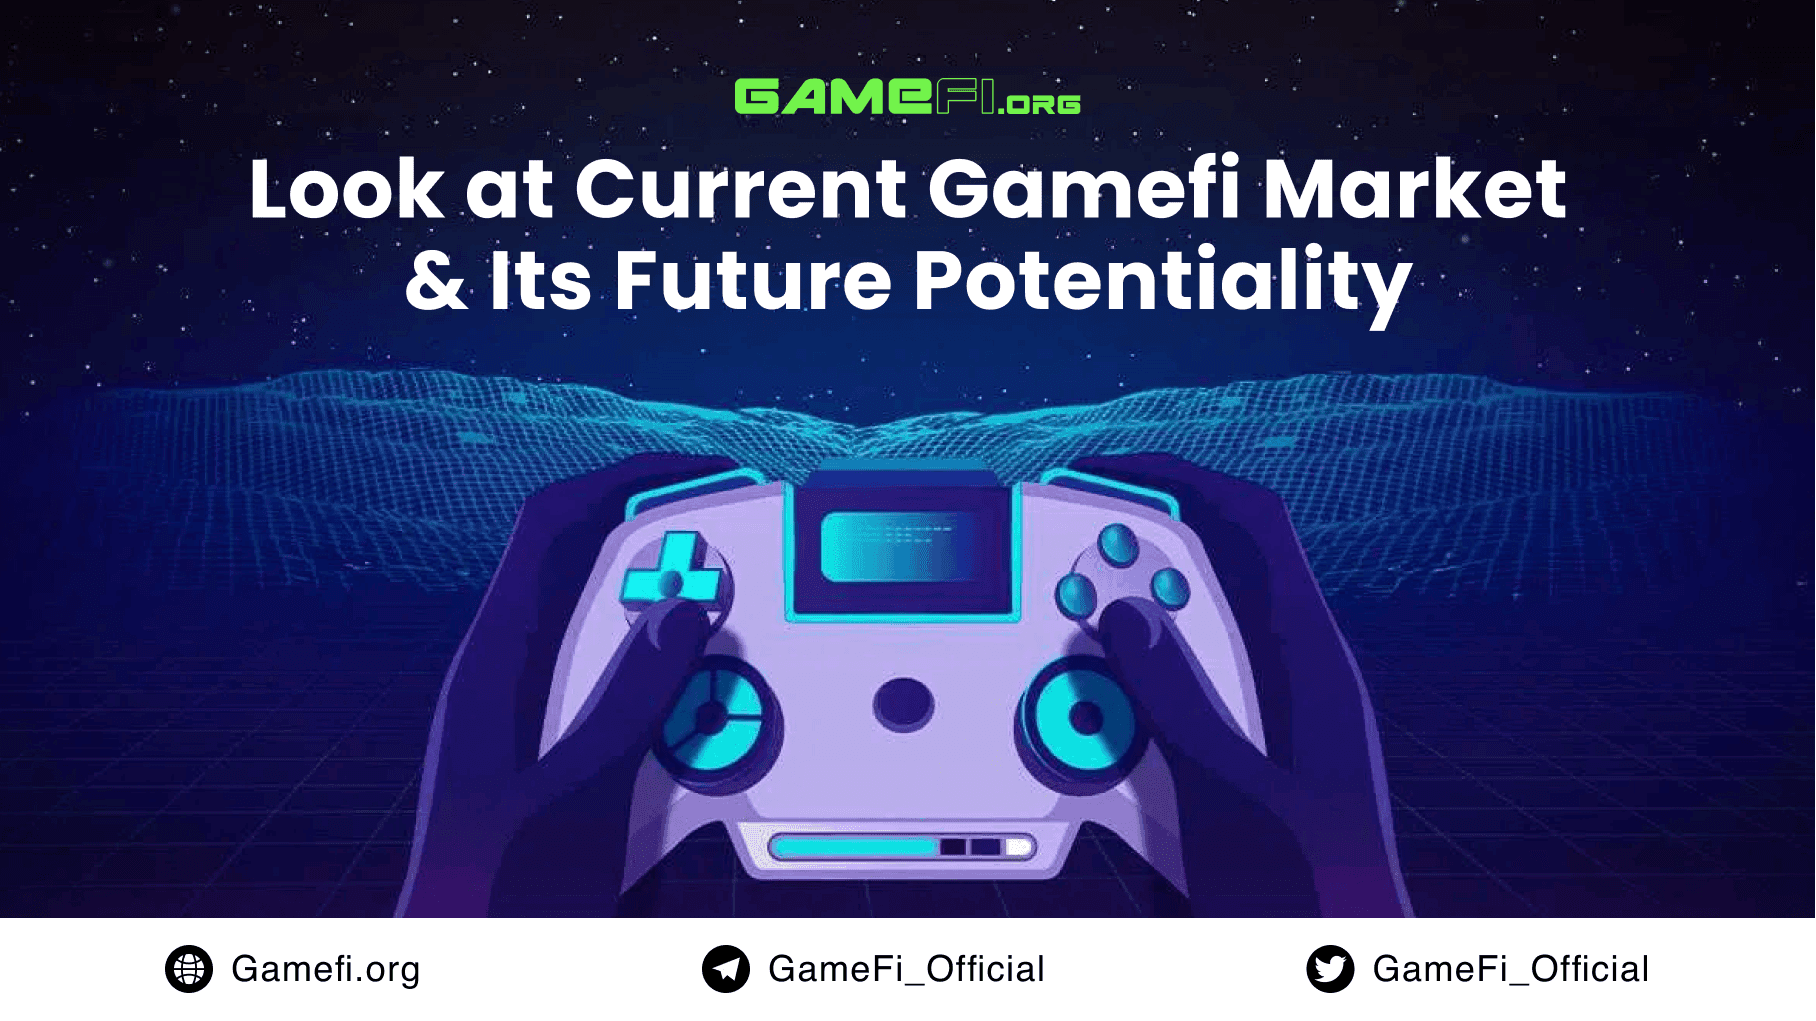 A Look at the Current Gamefi Market and Its Future Potentiality